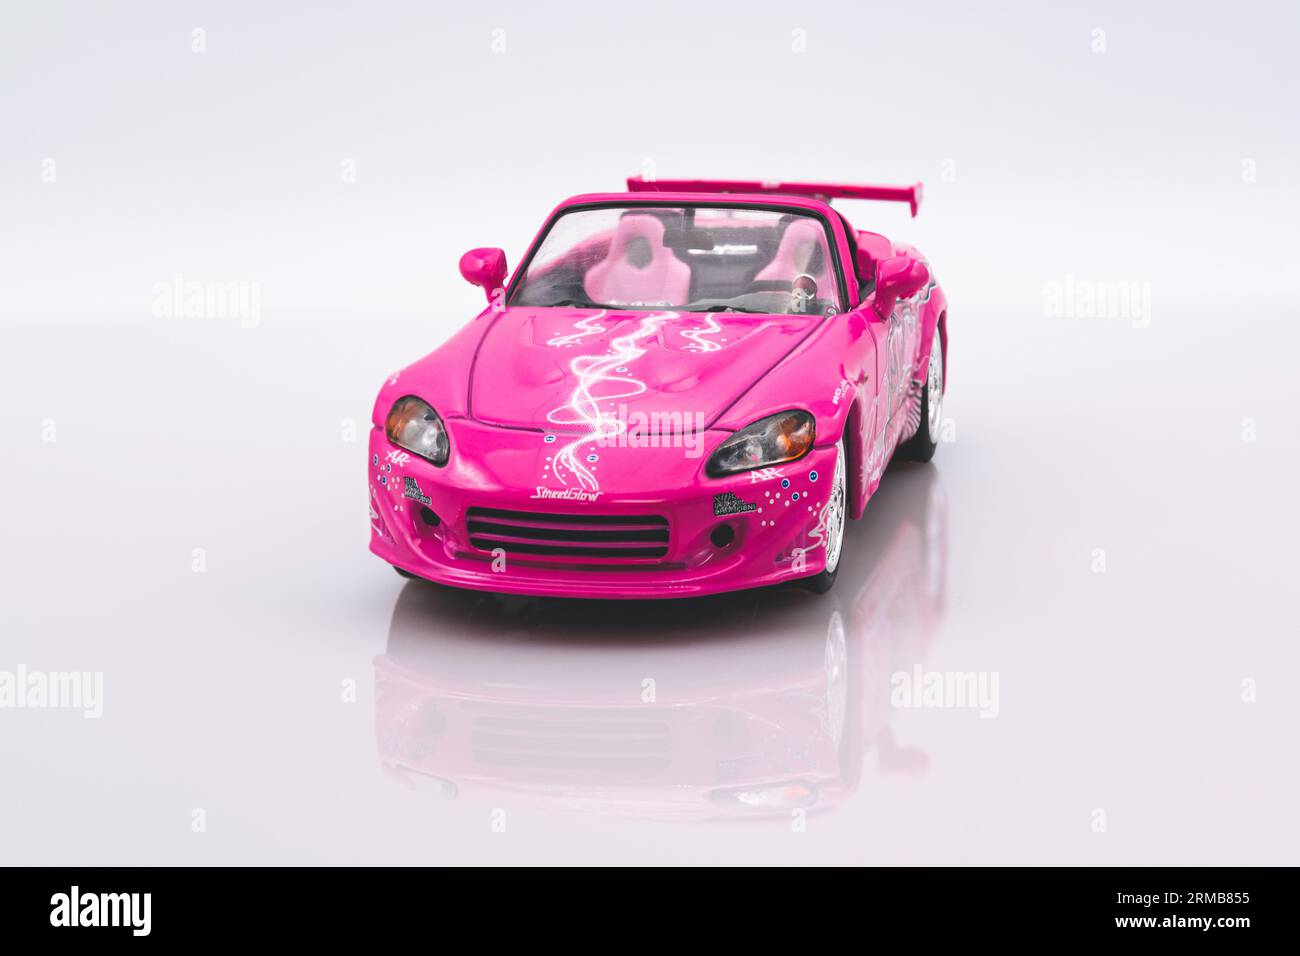 Fast&Furious Honda S2000 1:43 model car, front view, white background with reflection Stock Photo